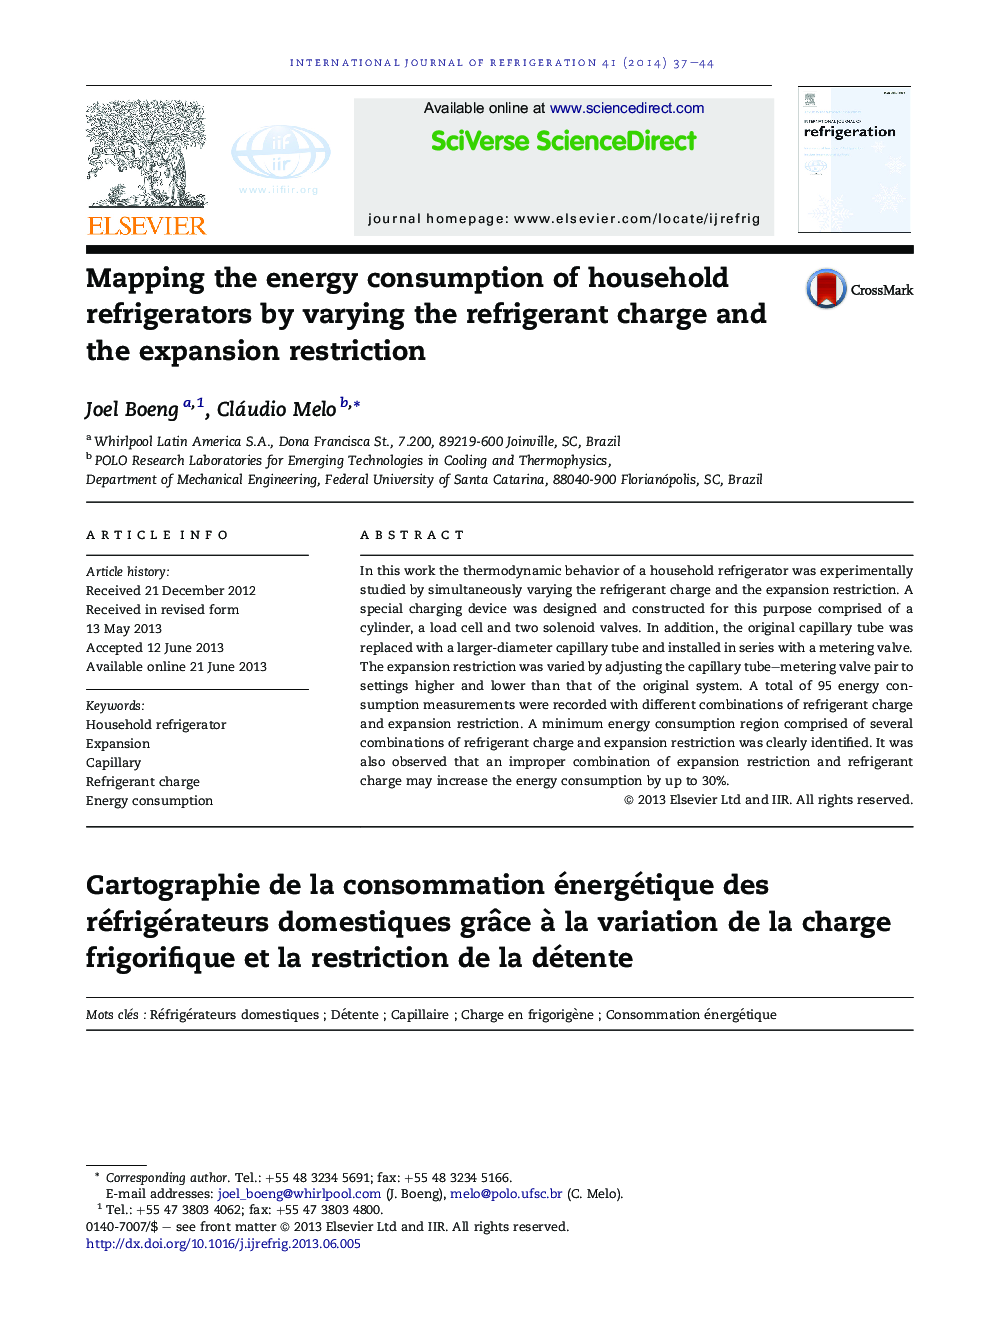 Mapping the energy consumption of household refrigerators by varying the refrigerant charge and the expansion restriction